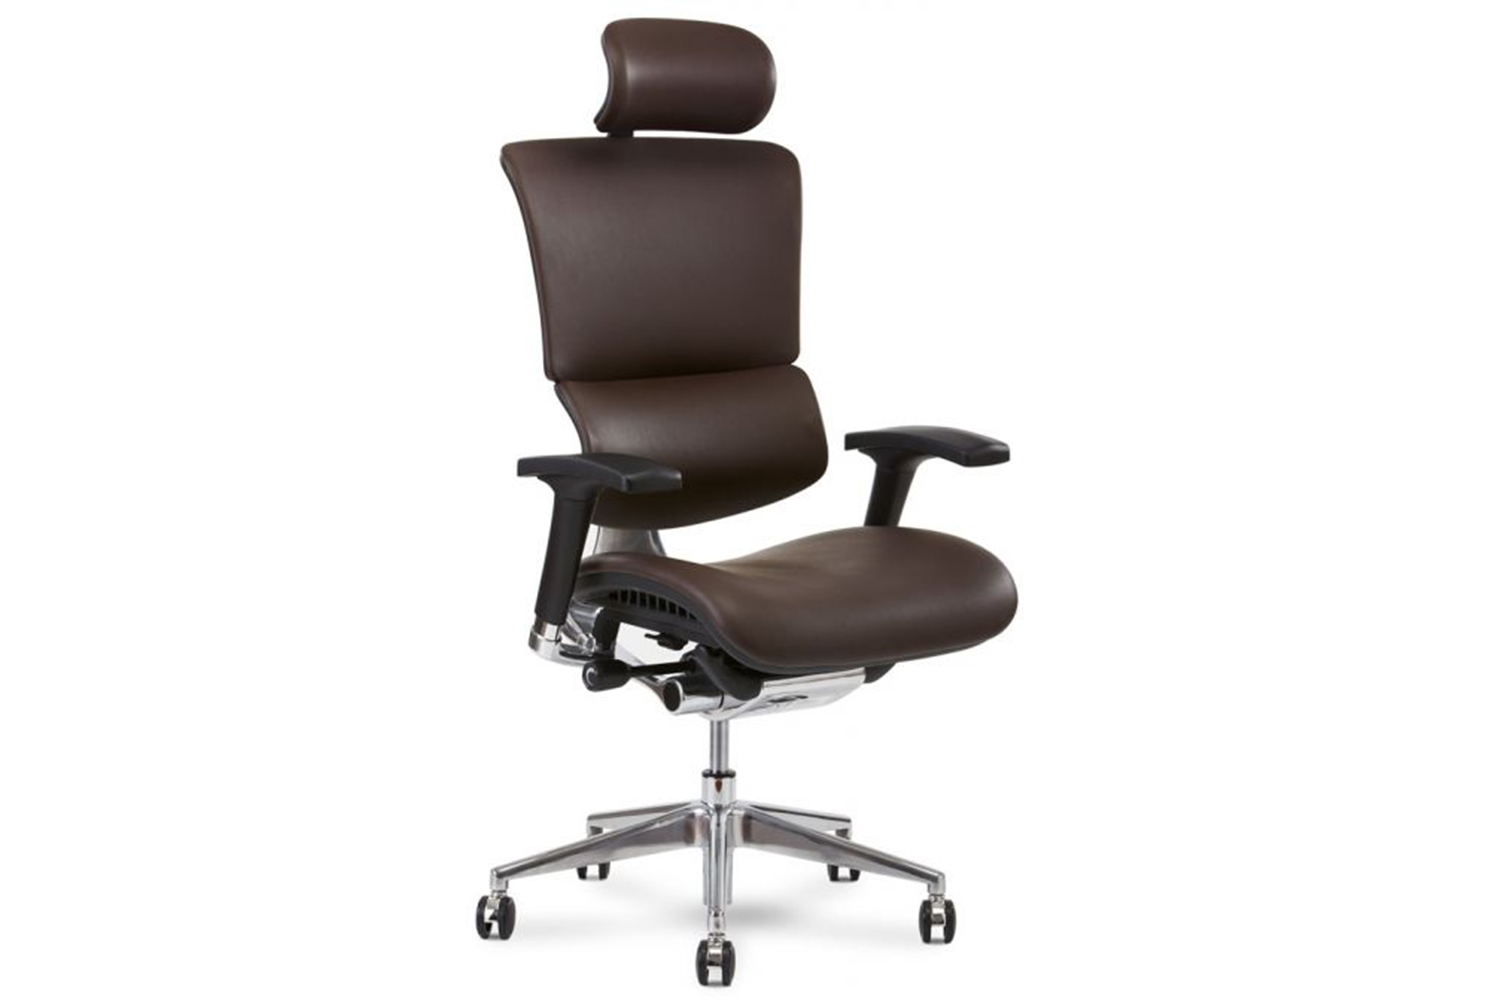 Introducing the X4 leather executive chair by X-Chair 